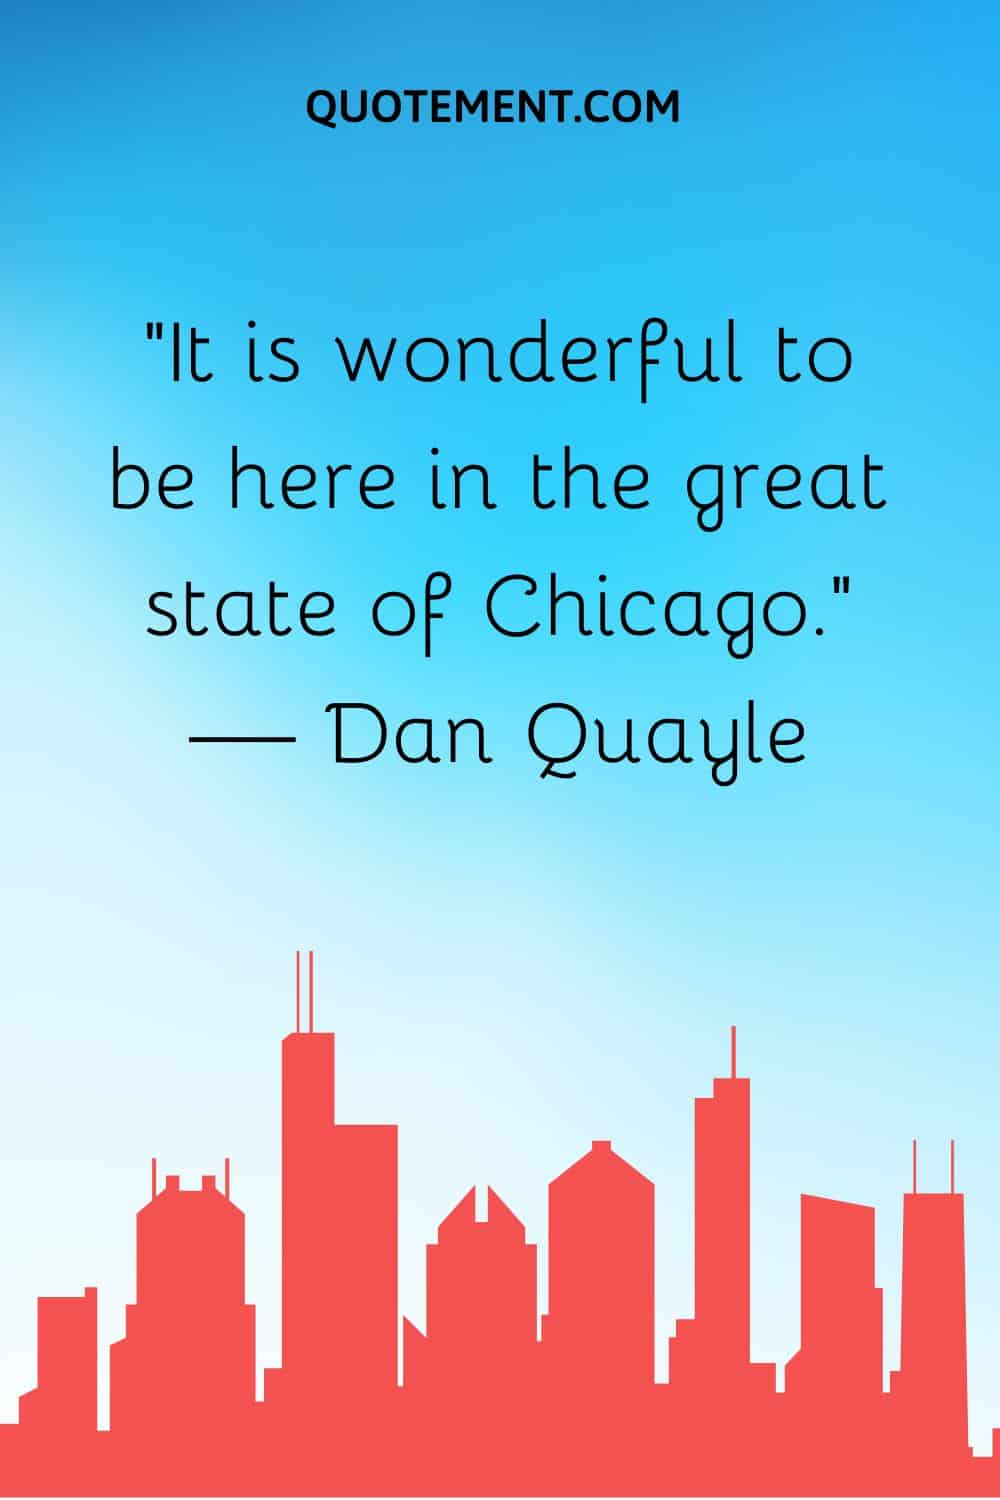 “It is wonderful to be here in the great state of Chicago.” — Dan Quayle